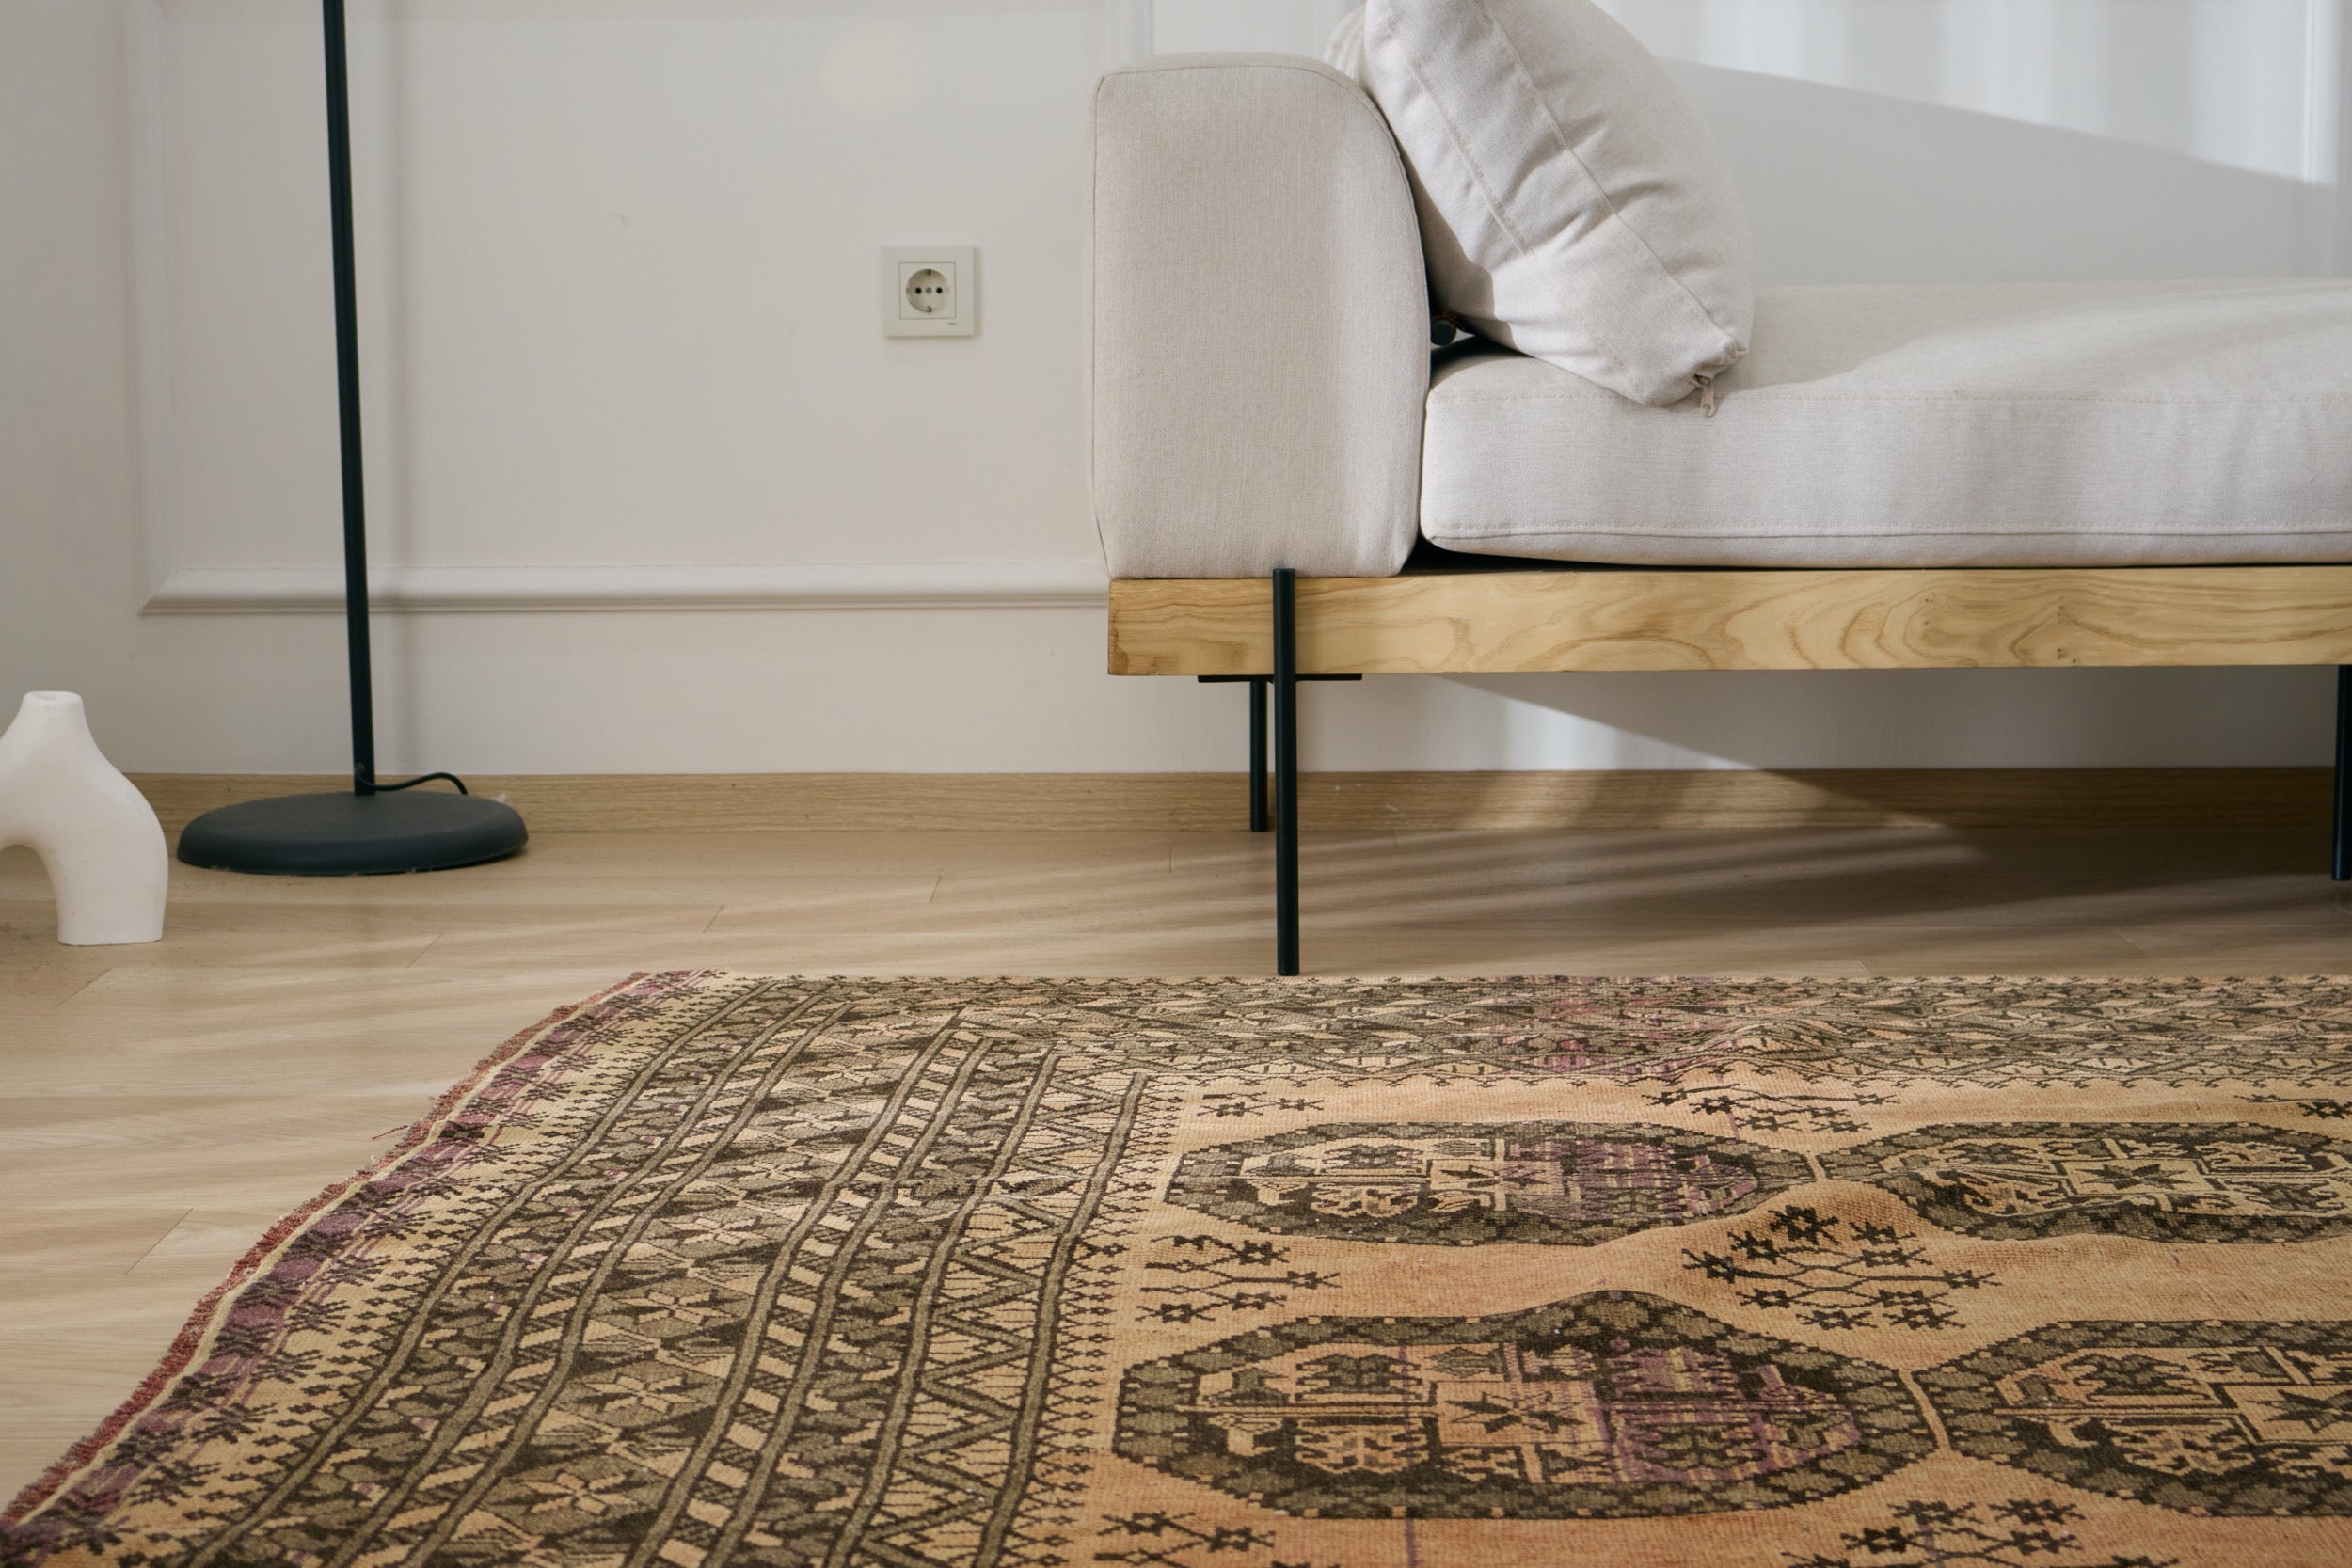 Reina - From the Heart of Ersari to Your Home | Kuden Rugs